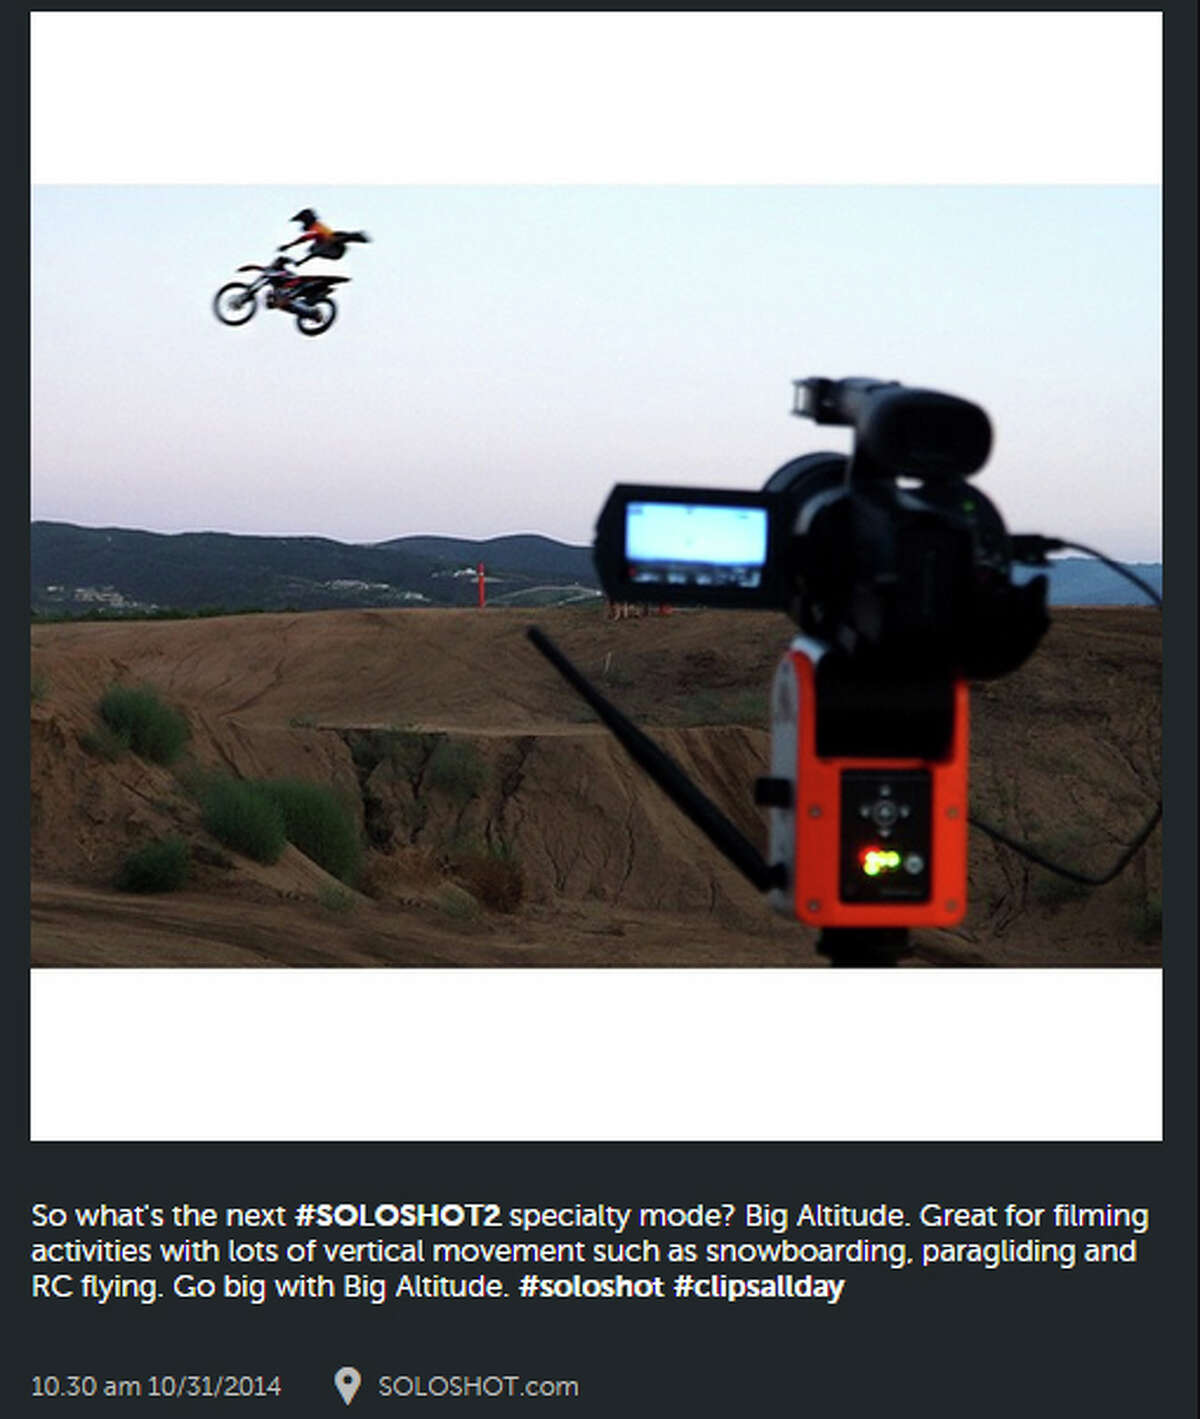 Soloshot: San Antonio soloshot.com Your personal robot cameraman who will keep you in frame as you backflip off of a vert ramp. According to the company's website, Soloshot started as a product for surfers but has now grown into other sports and even dog training.